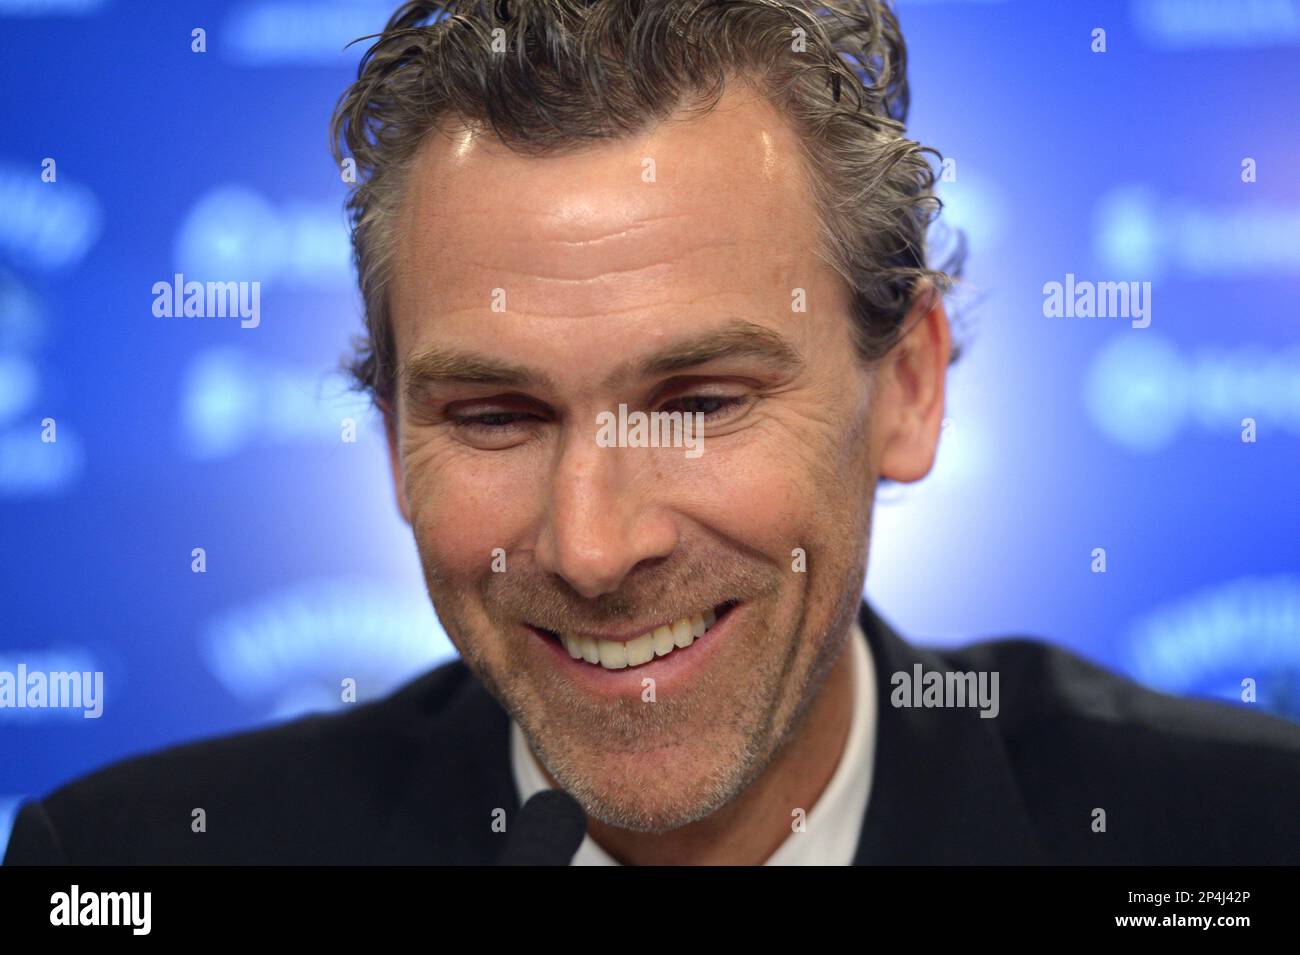 Vancouver Canucks take leap of faith with new president Trevor Linden -  Sports Illustrated